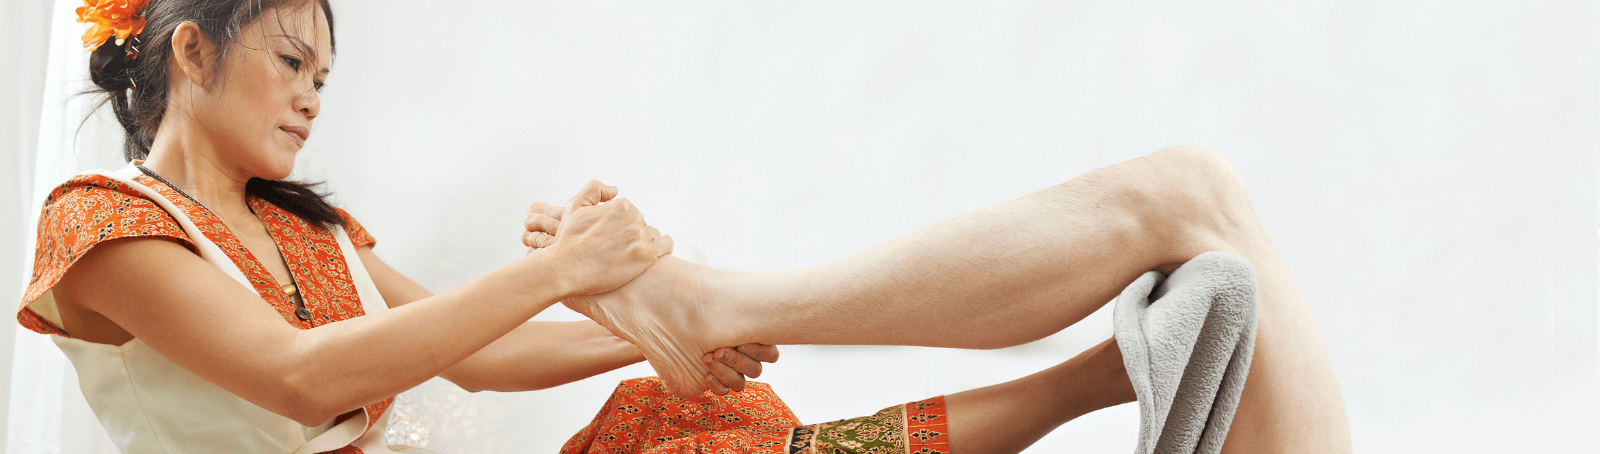 Thai Massage: History, Culture, and Benefits